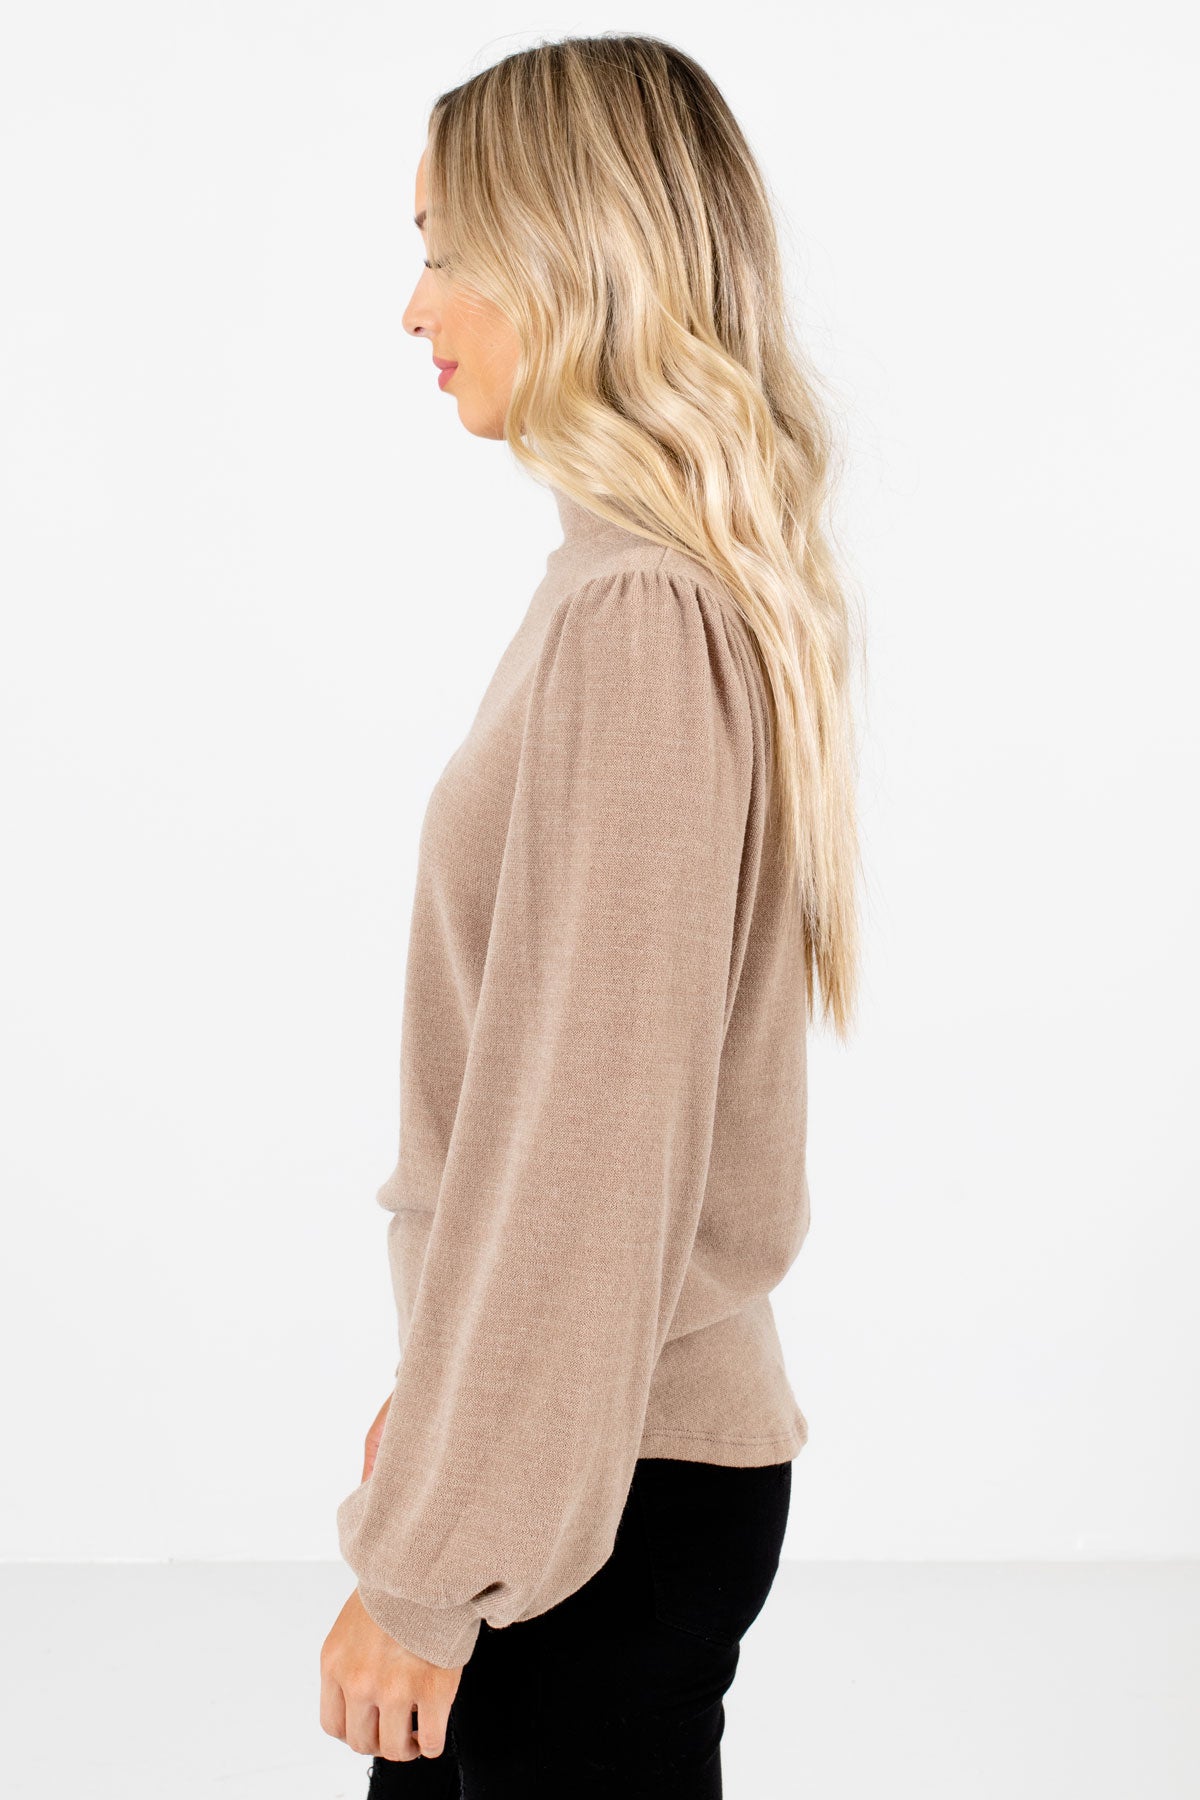 Taupe Brown Bishop Sleeve Boutique Tops for Women